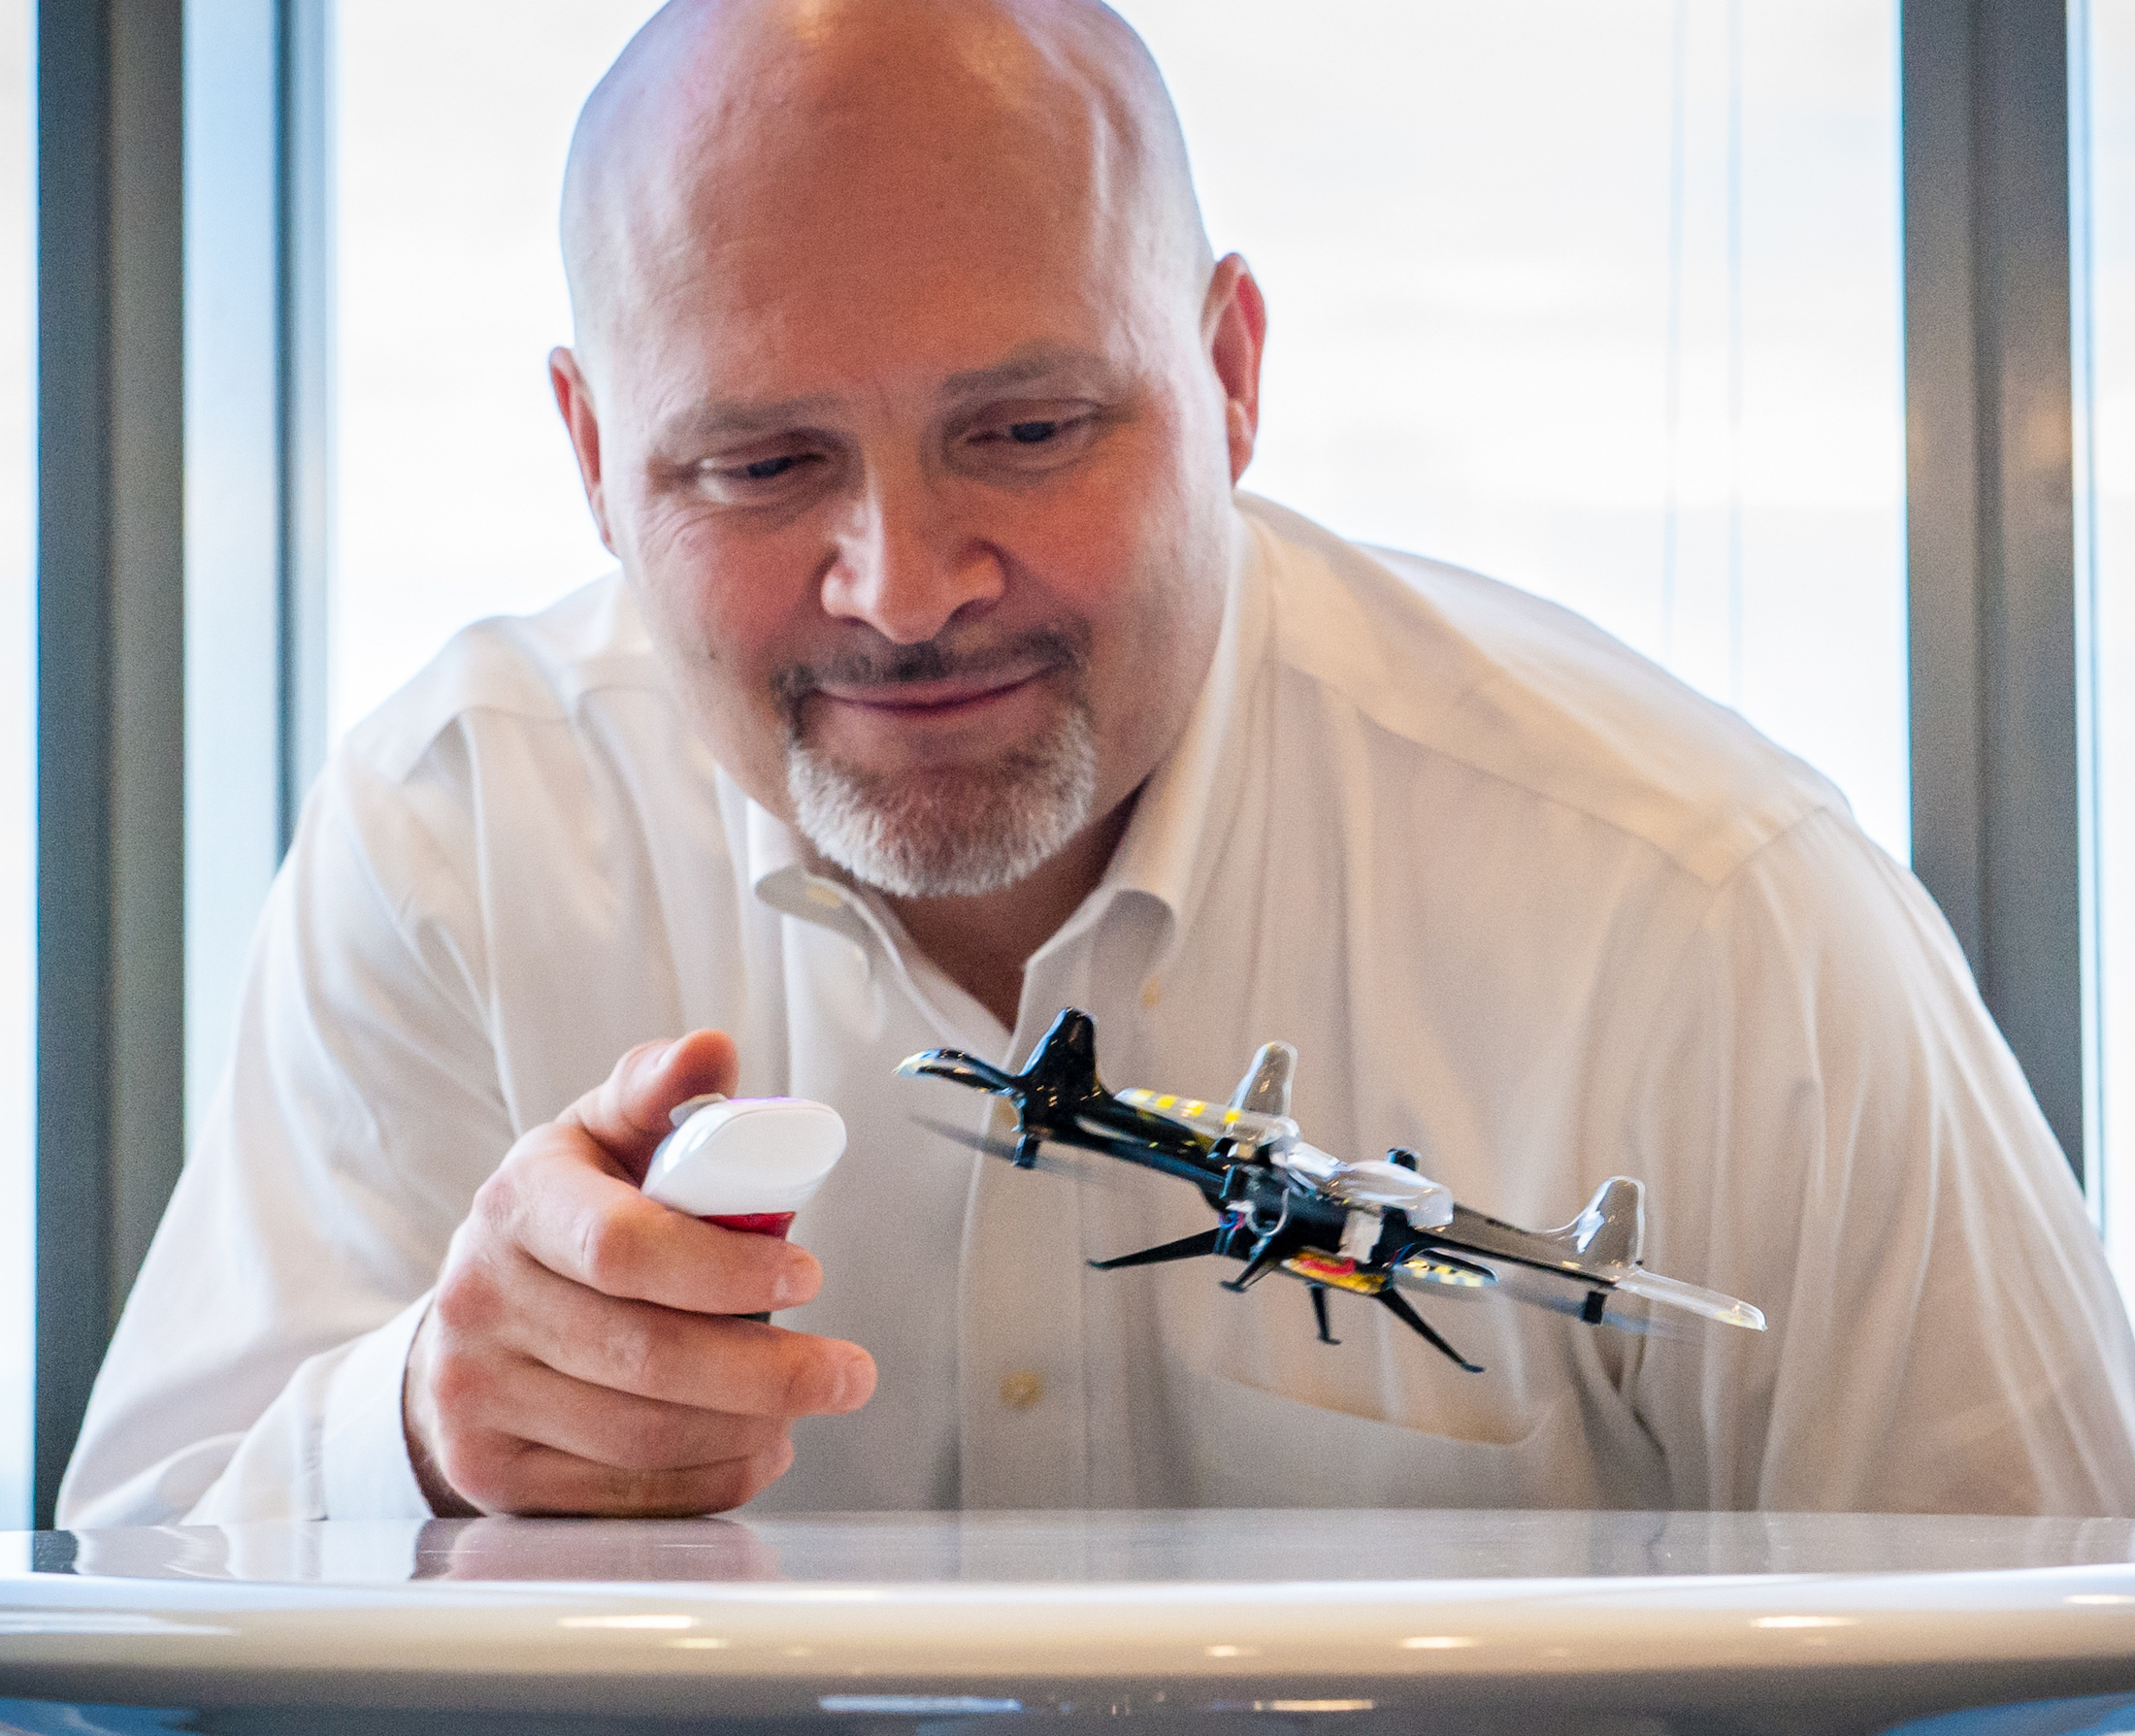 Brad Pedersen, CEO of QFO Labs, flying the company's quadcopter drone.